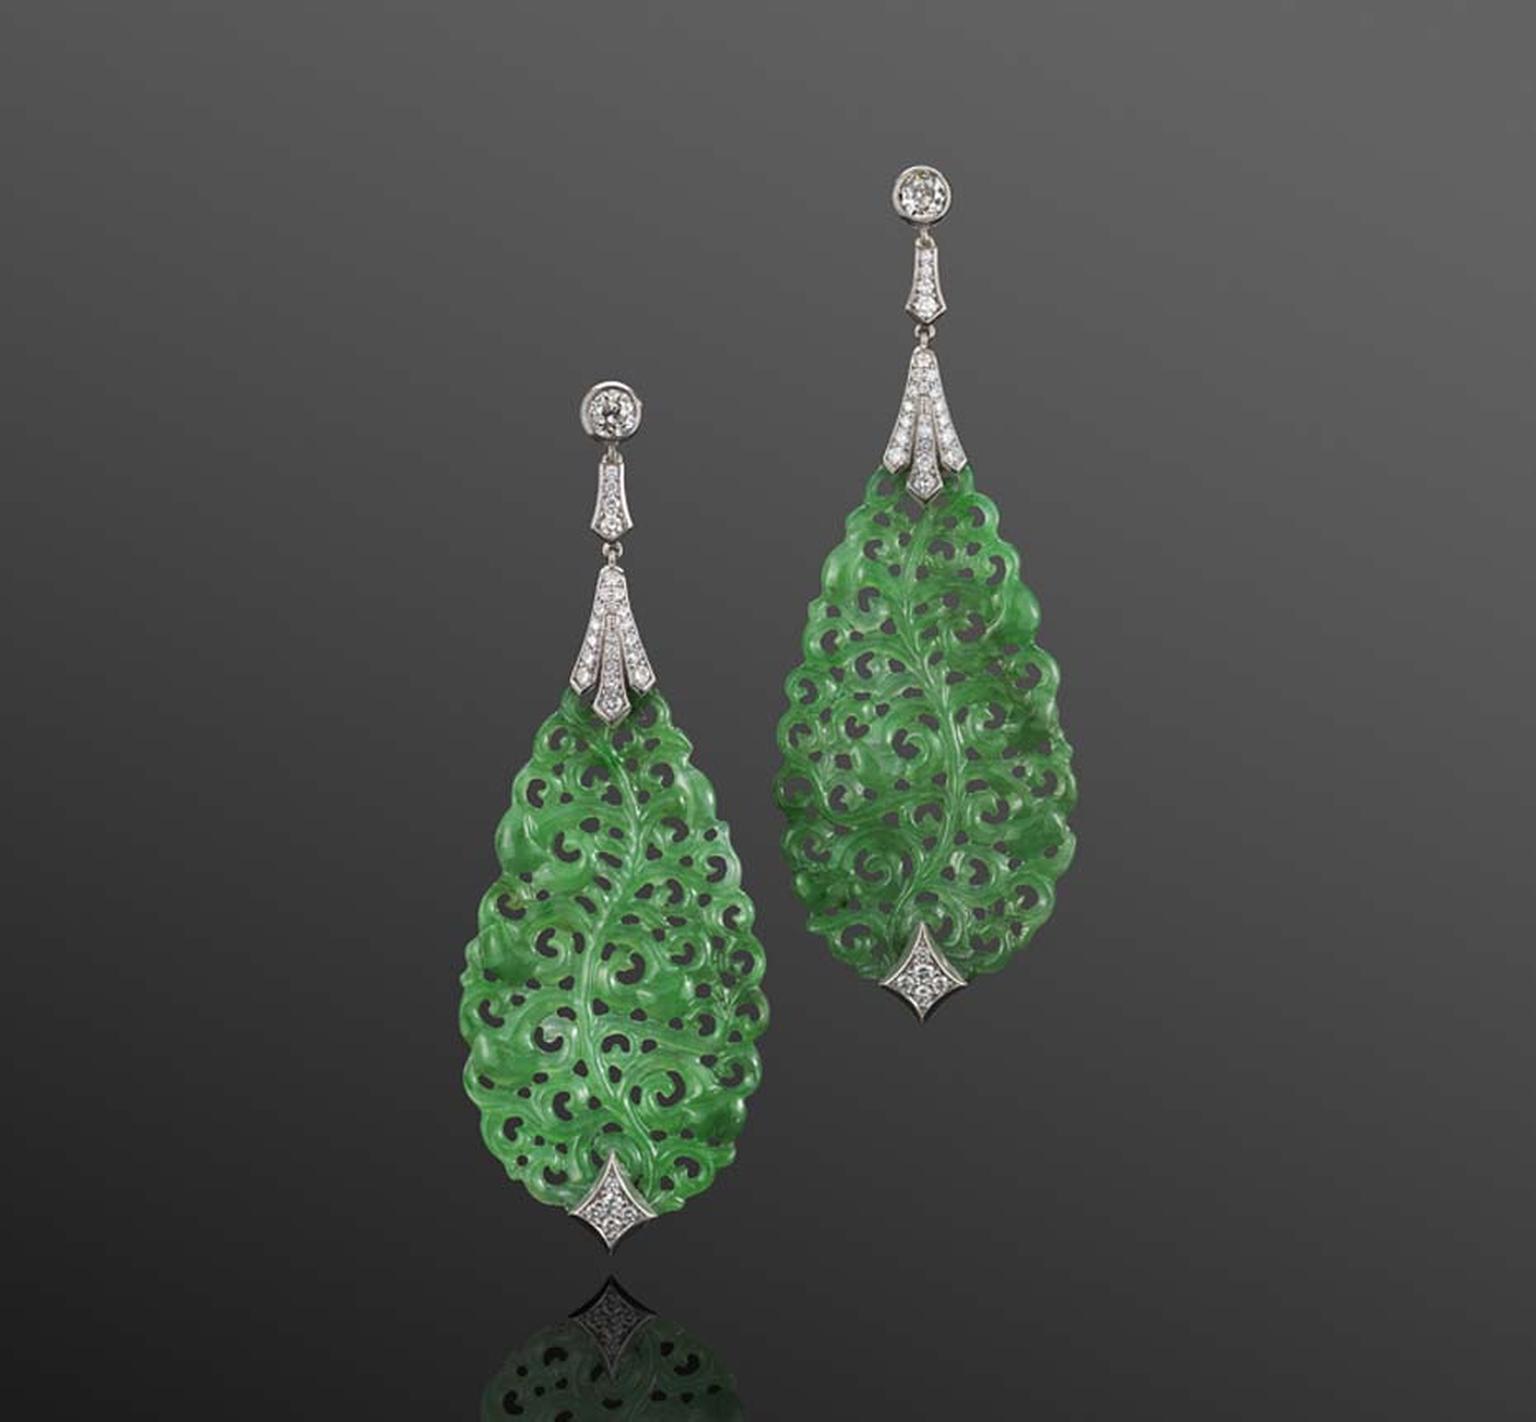 Green jade carved earrings from the Fred Leighton contemporary collection